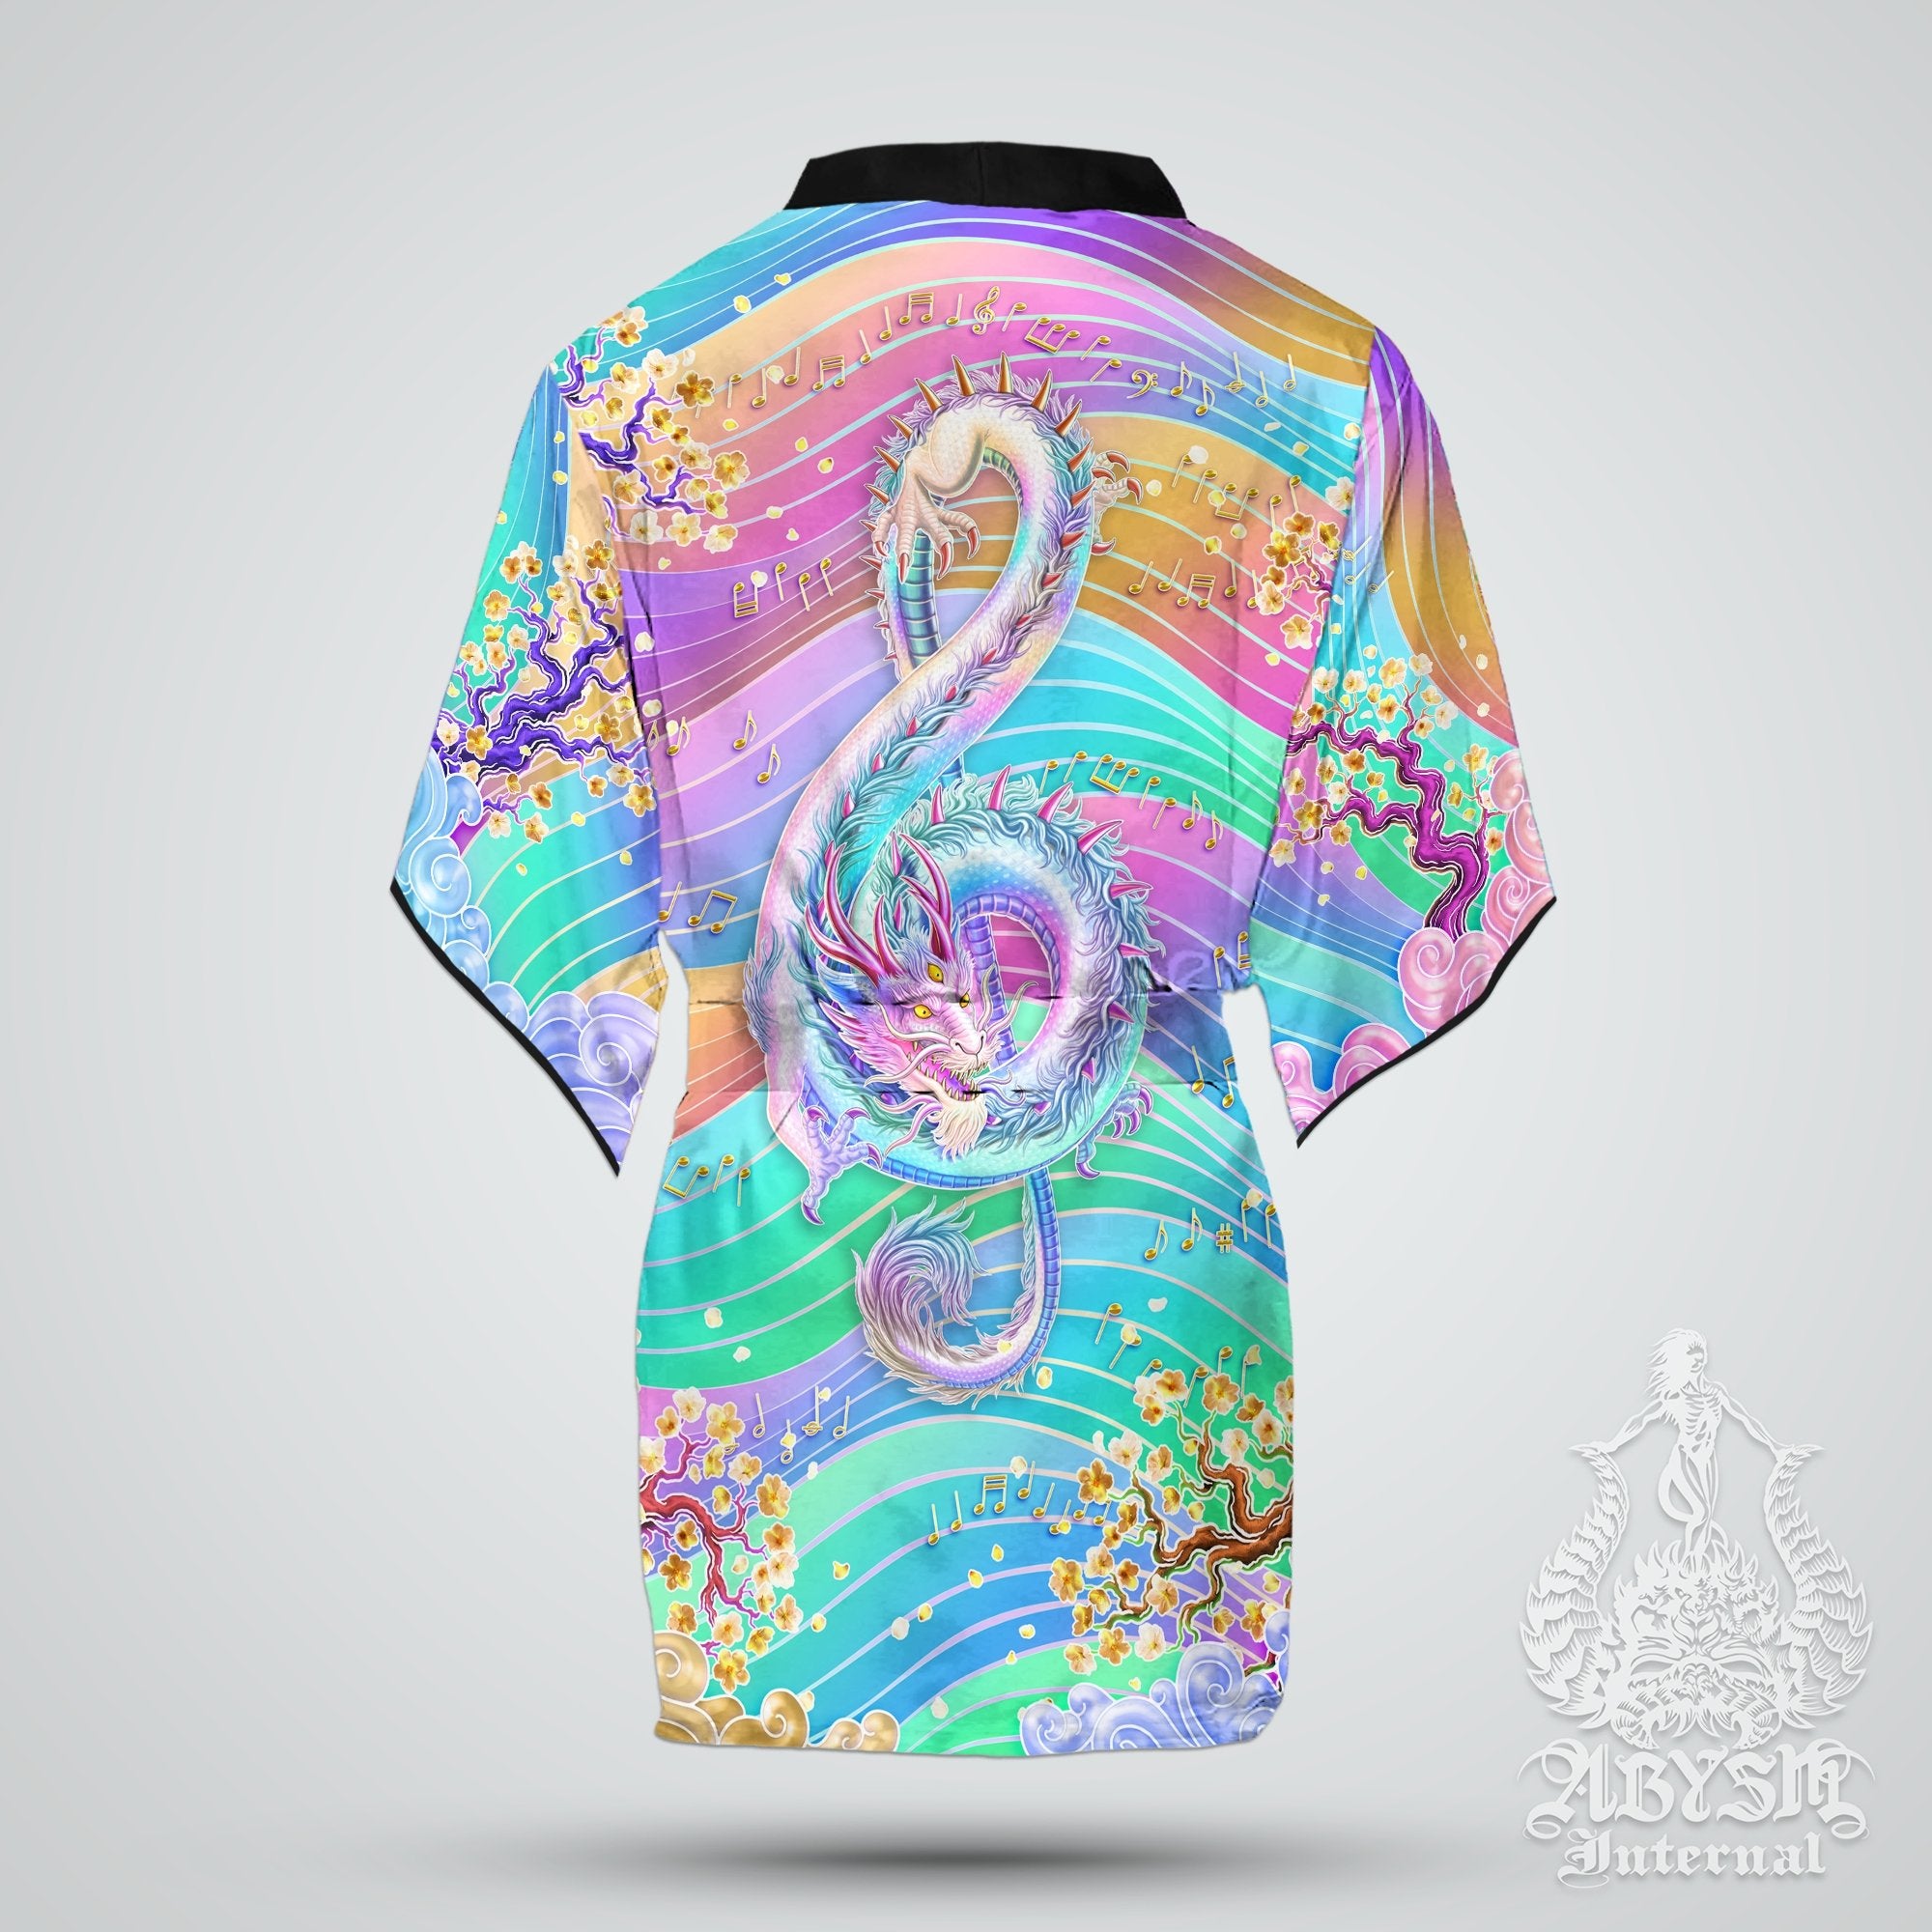 Music Cover Up, Beach Rave Outfit, Party Kimono, Summer Festival Robe, Aesthetic Indie and Alternative Clothing, Unisex - Dragon, Holographic Pastel I - Abysm Internal